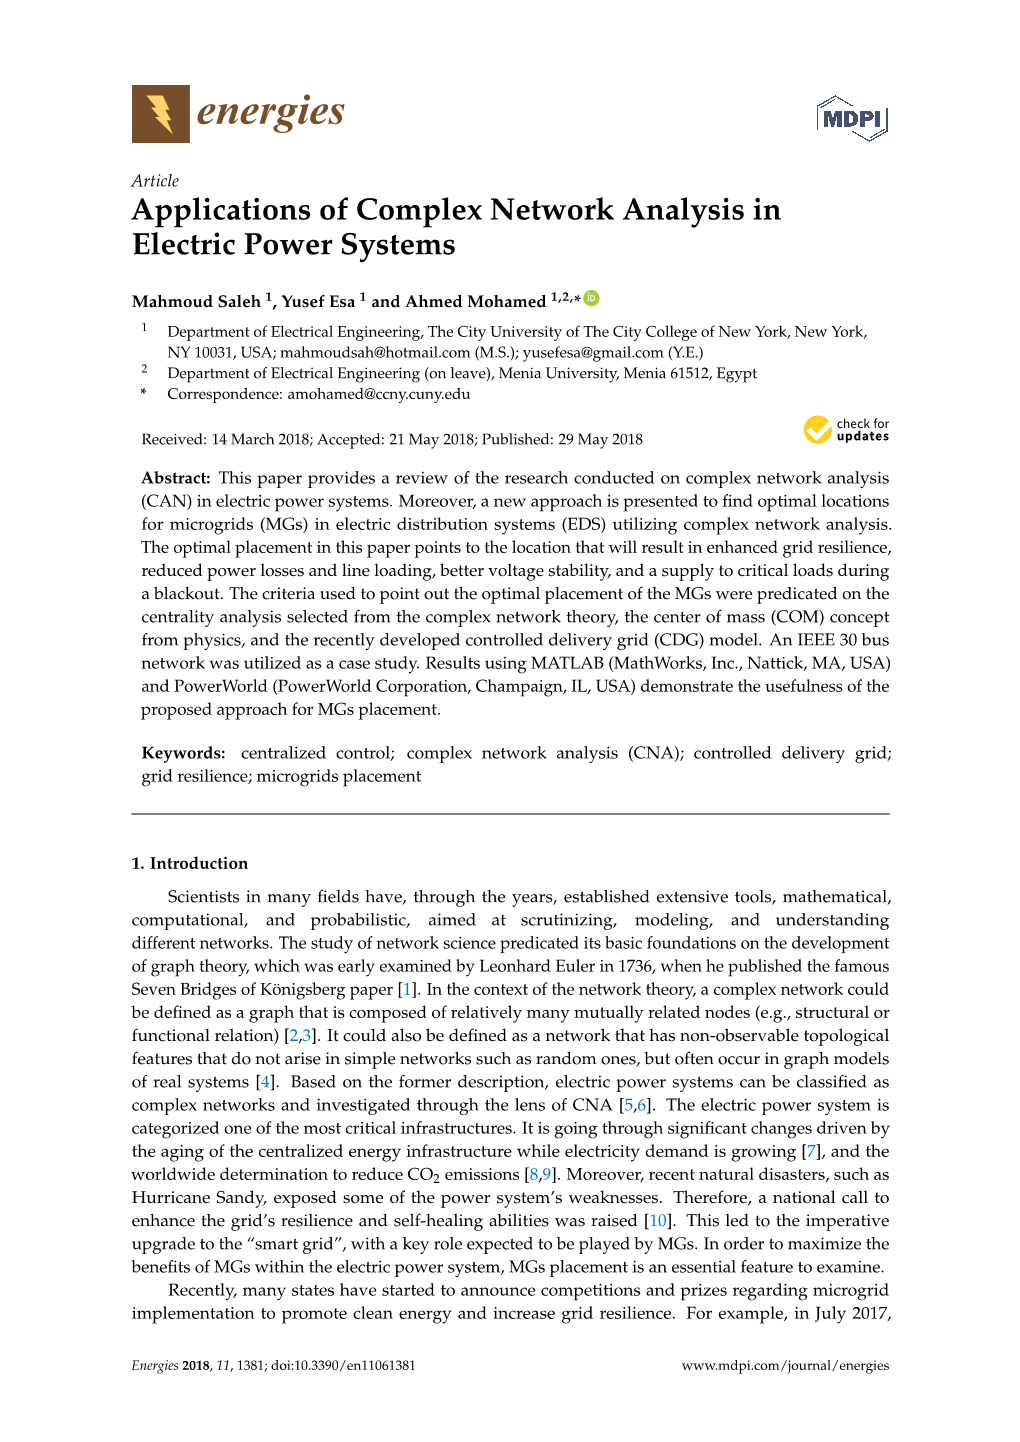 Applications of Complex Network Analysis in Electric Power Systems